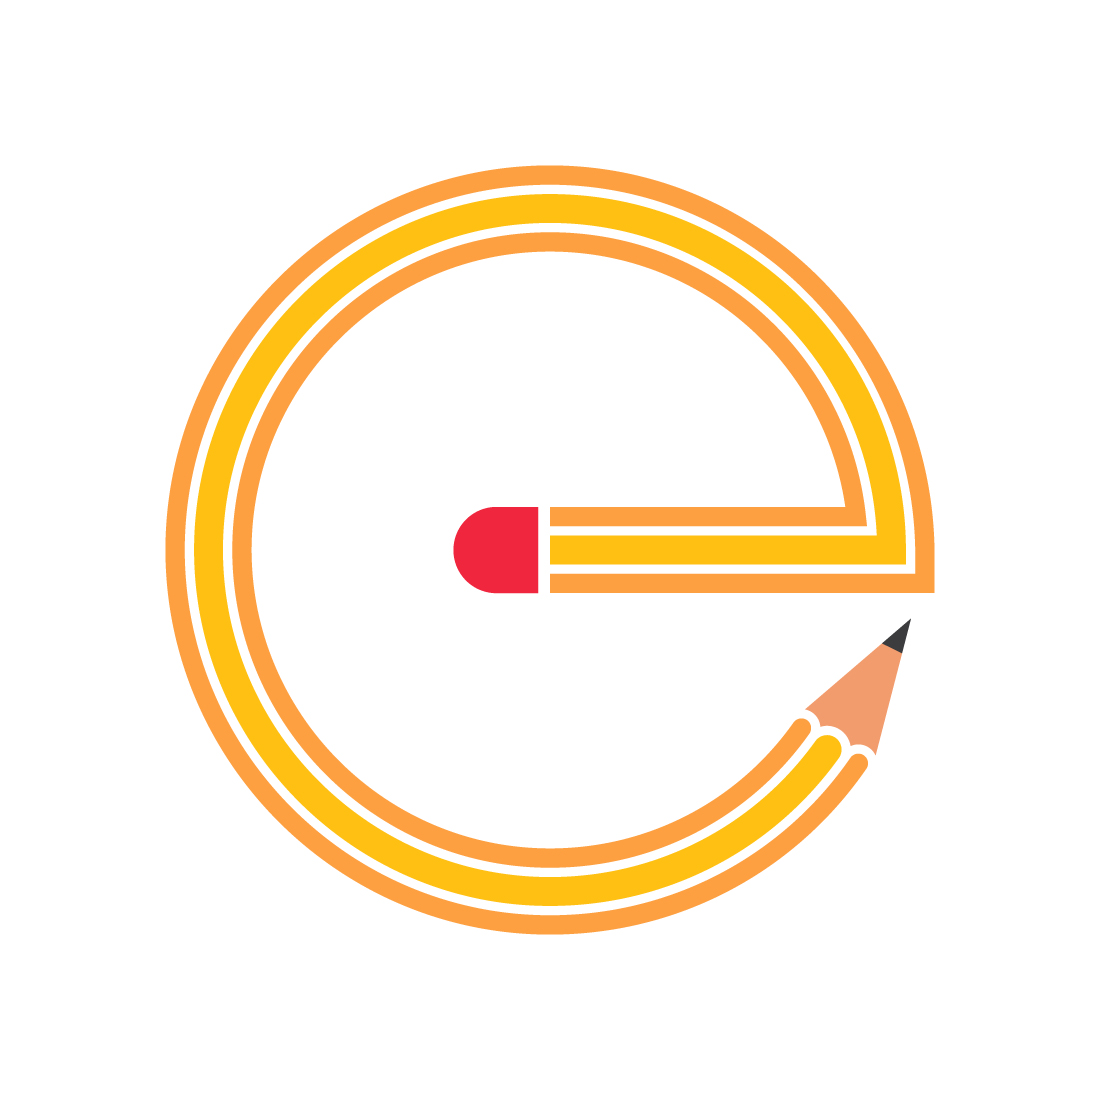 Letter E with Pencil for education business preview image.